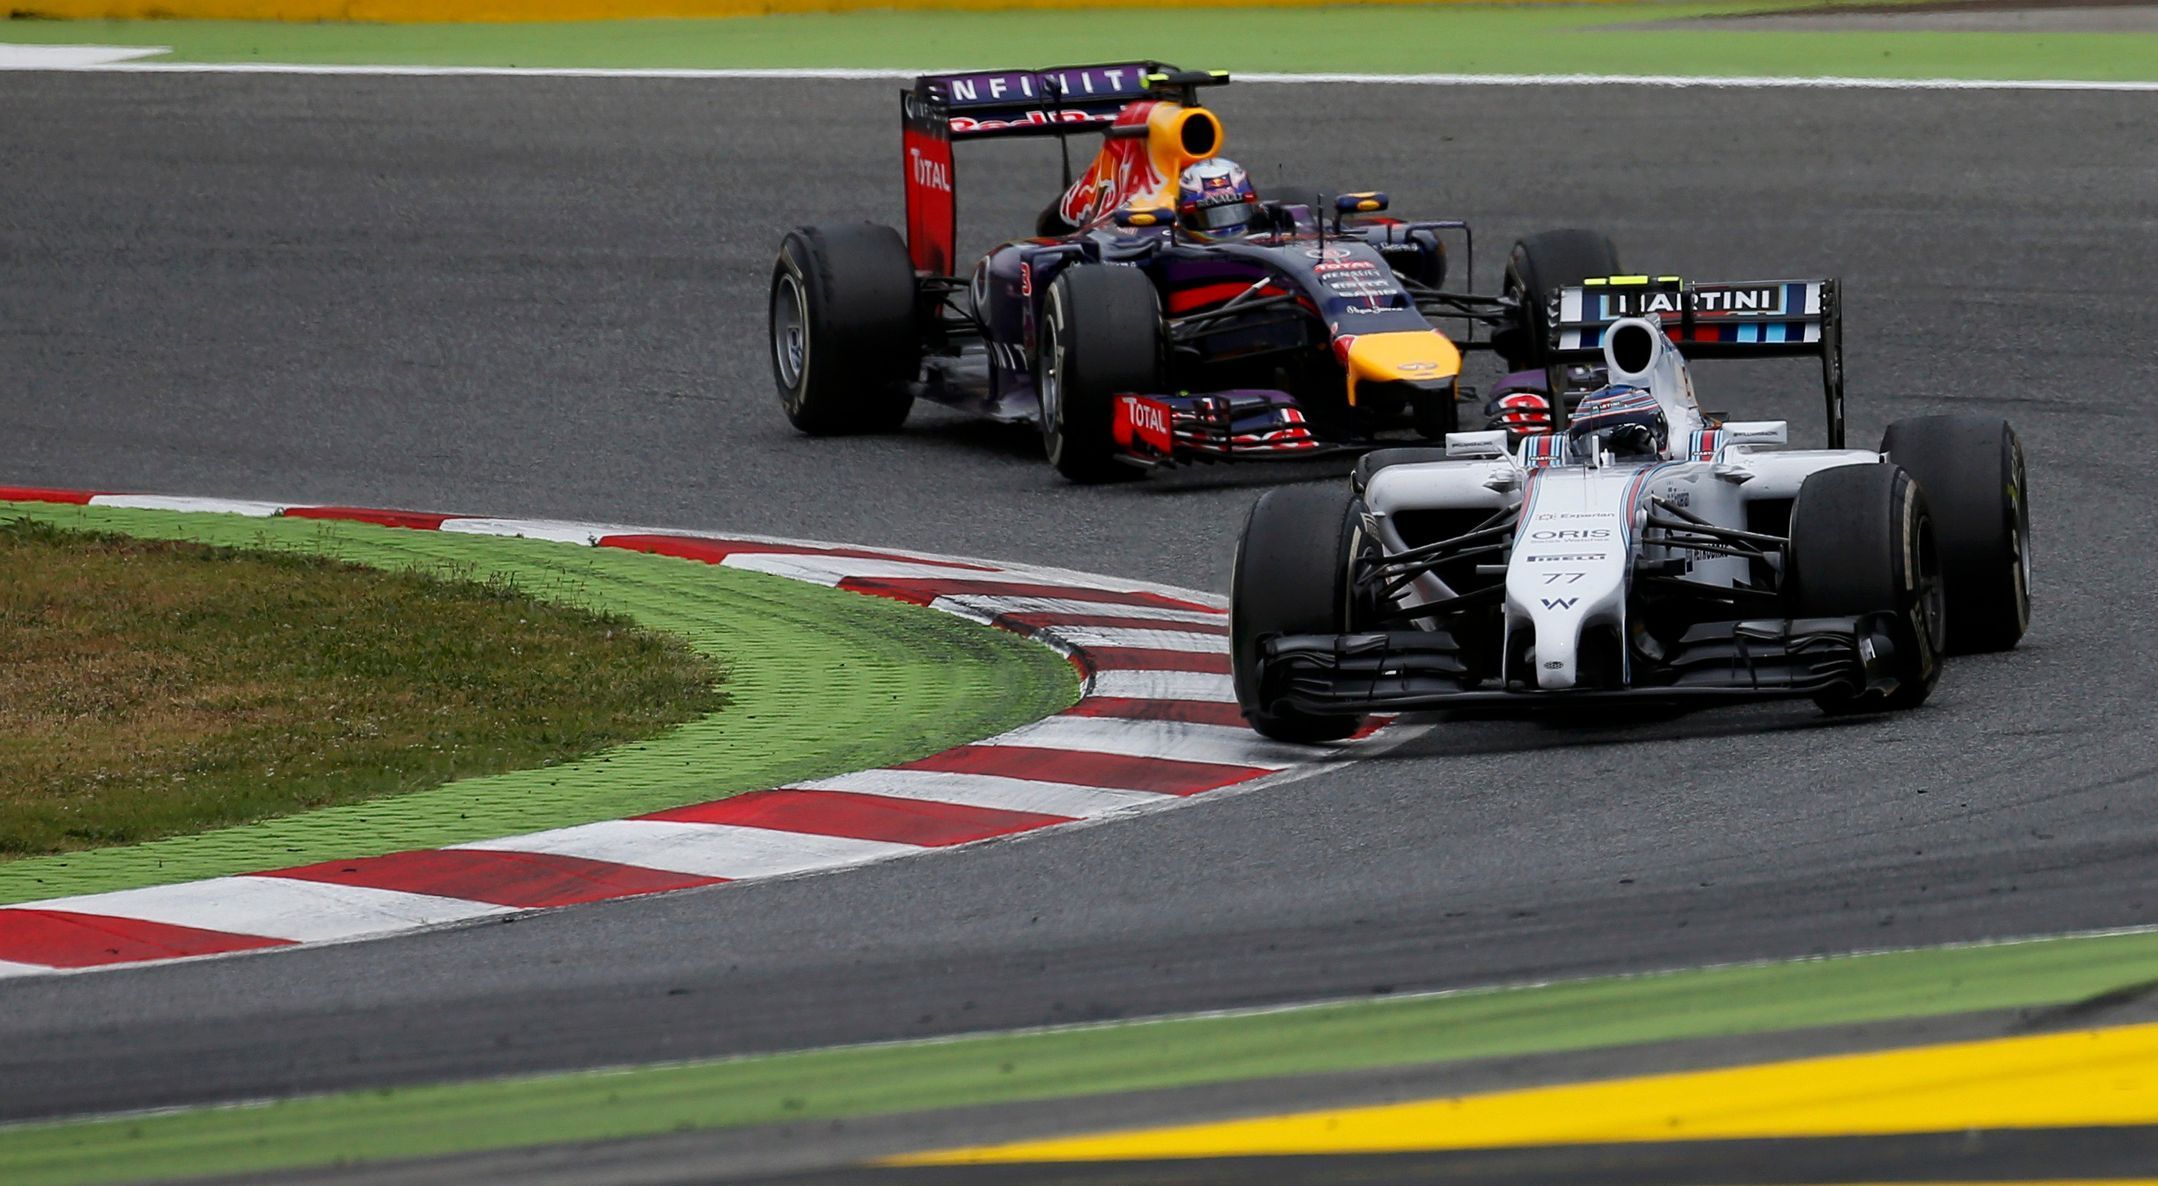 Williams Formula One driver Bottas of Finland and Red Bull Formula One driver Ricciardo of Australia compete during the Spanish F1 Grand Prix at the Barcelona-Catalunya Circuit in Montmelo